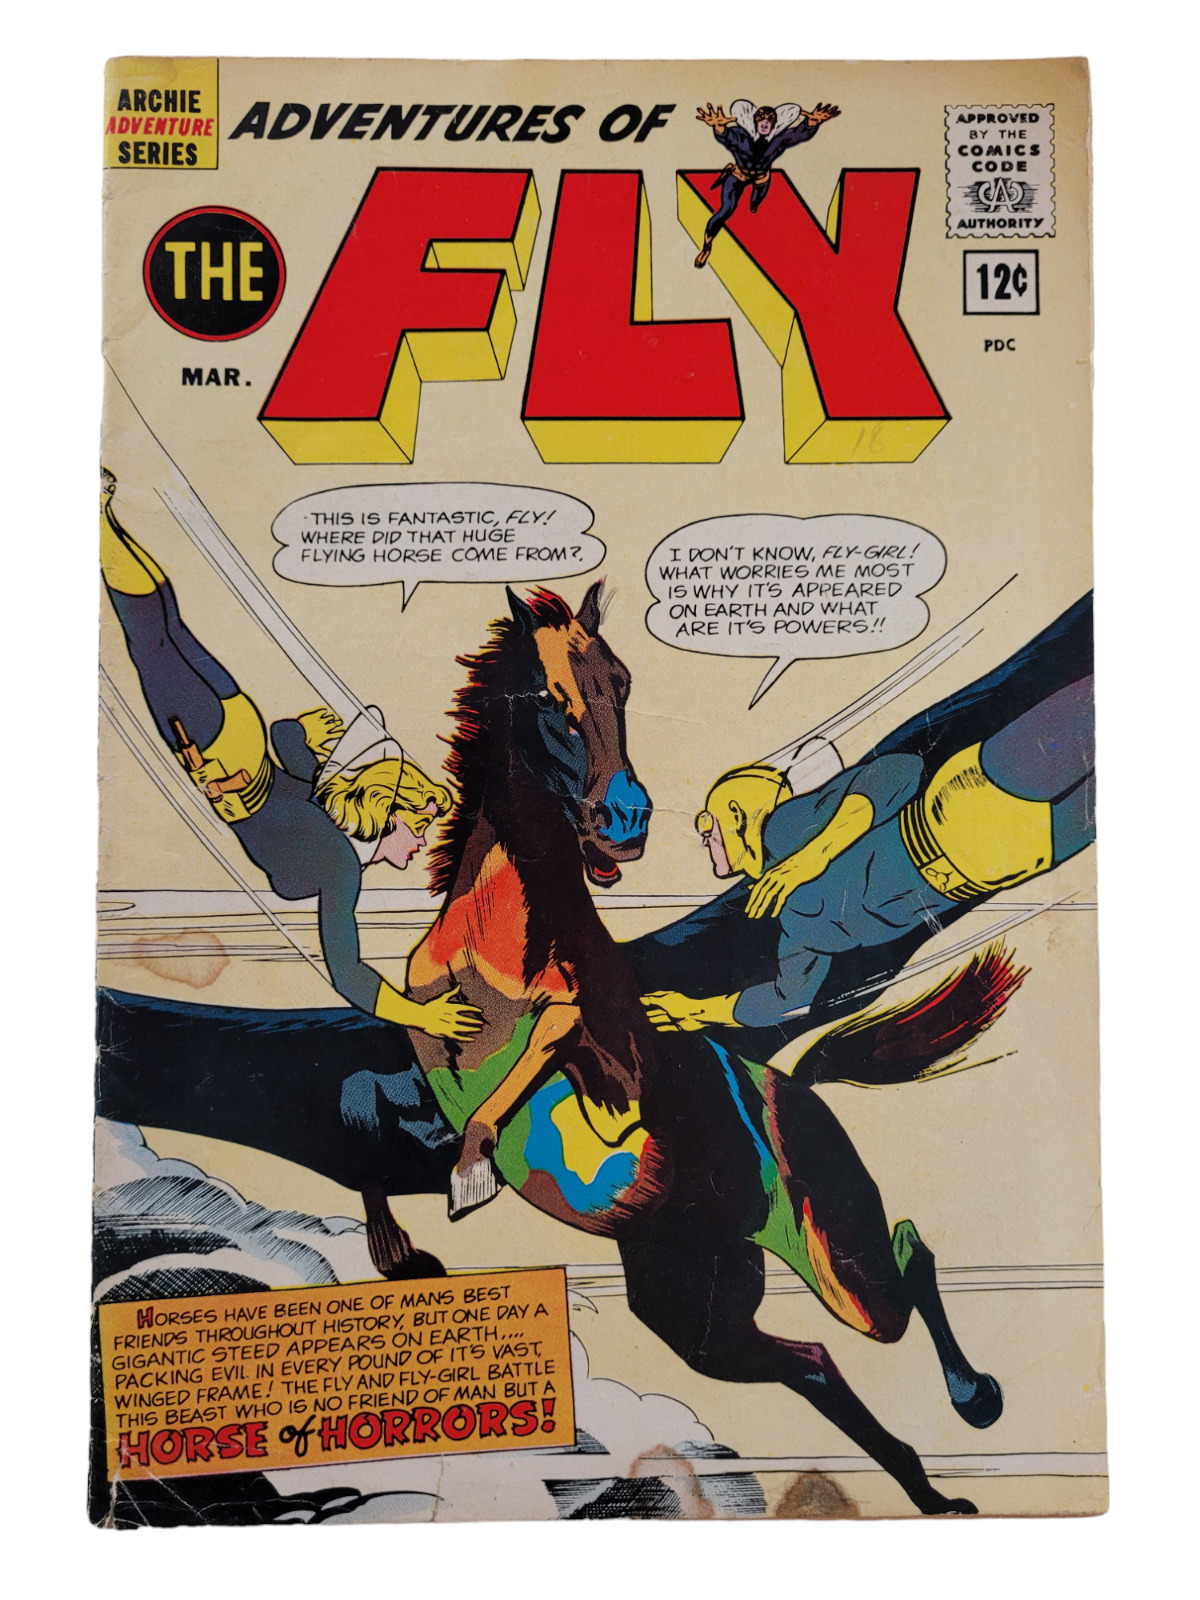 ADVENTURES Of The FLY #18 Scarce HTF Archie Adventure Series 3.0/3.5 Range RAW